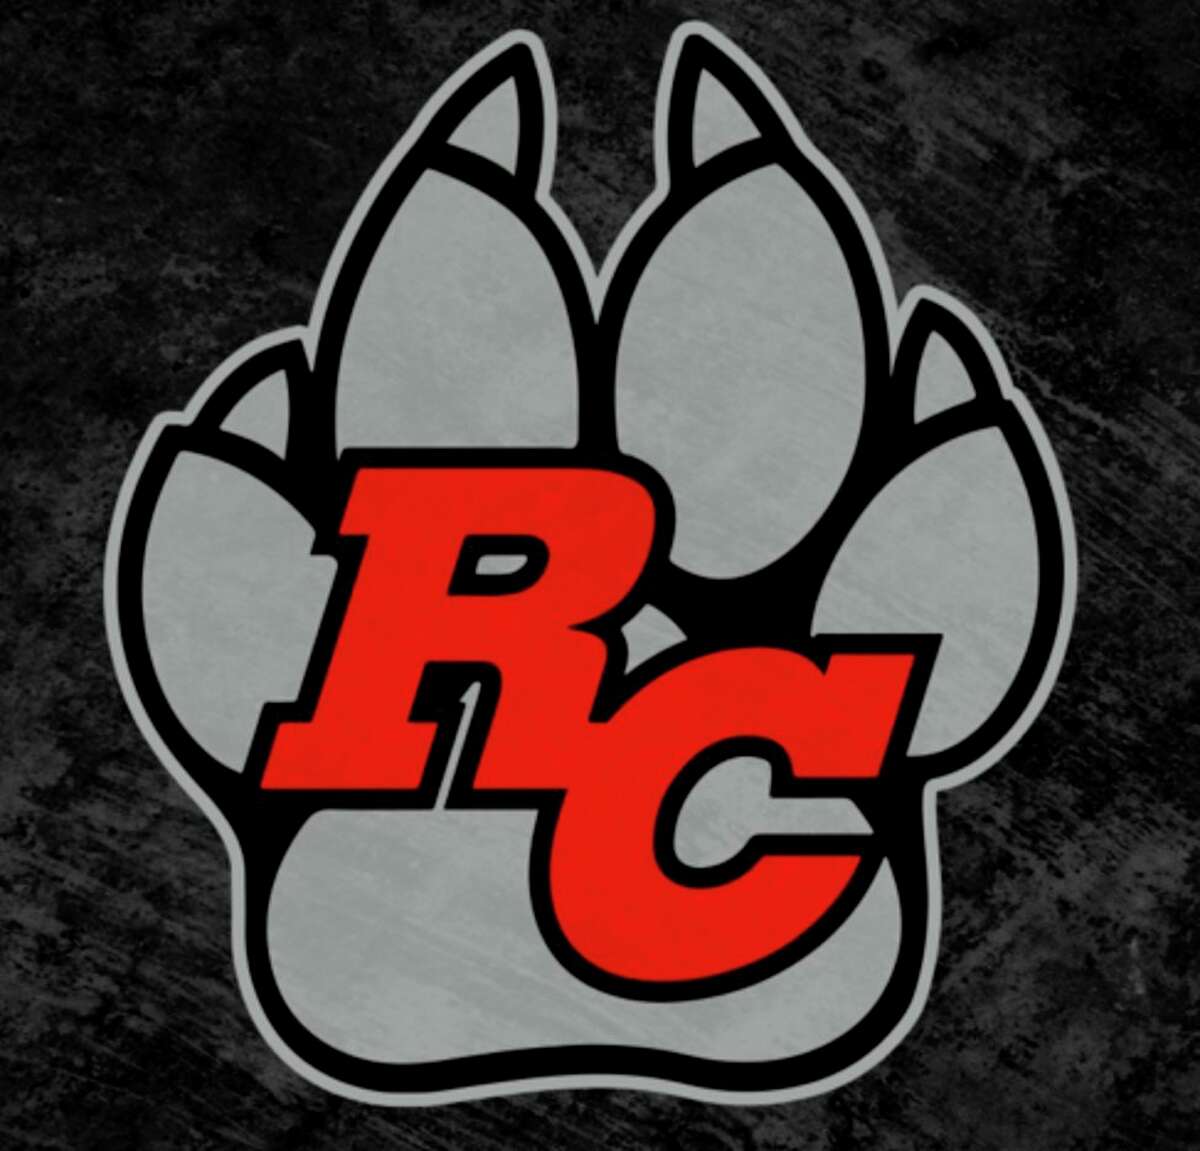 Reed City High names honor roll students